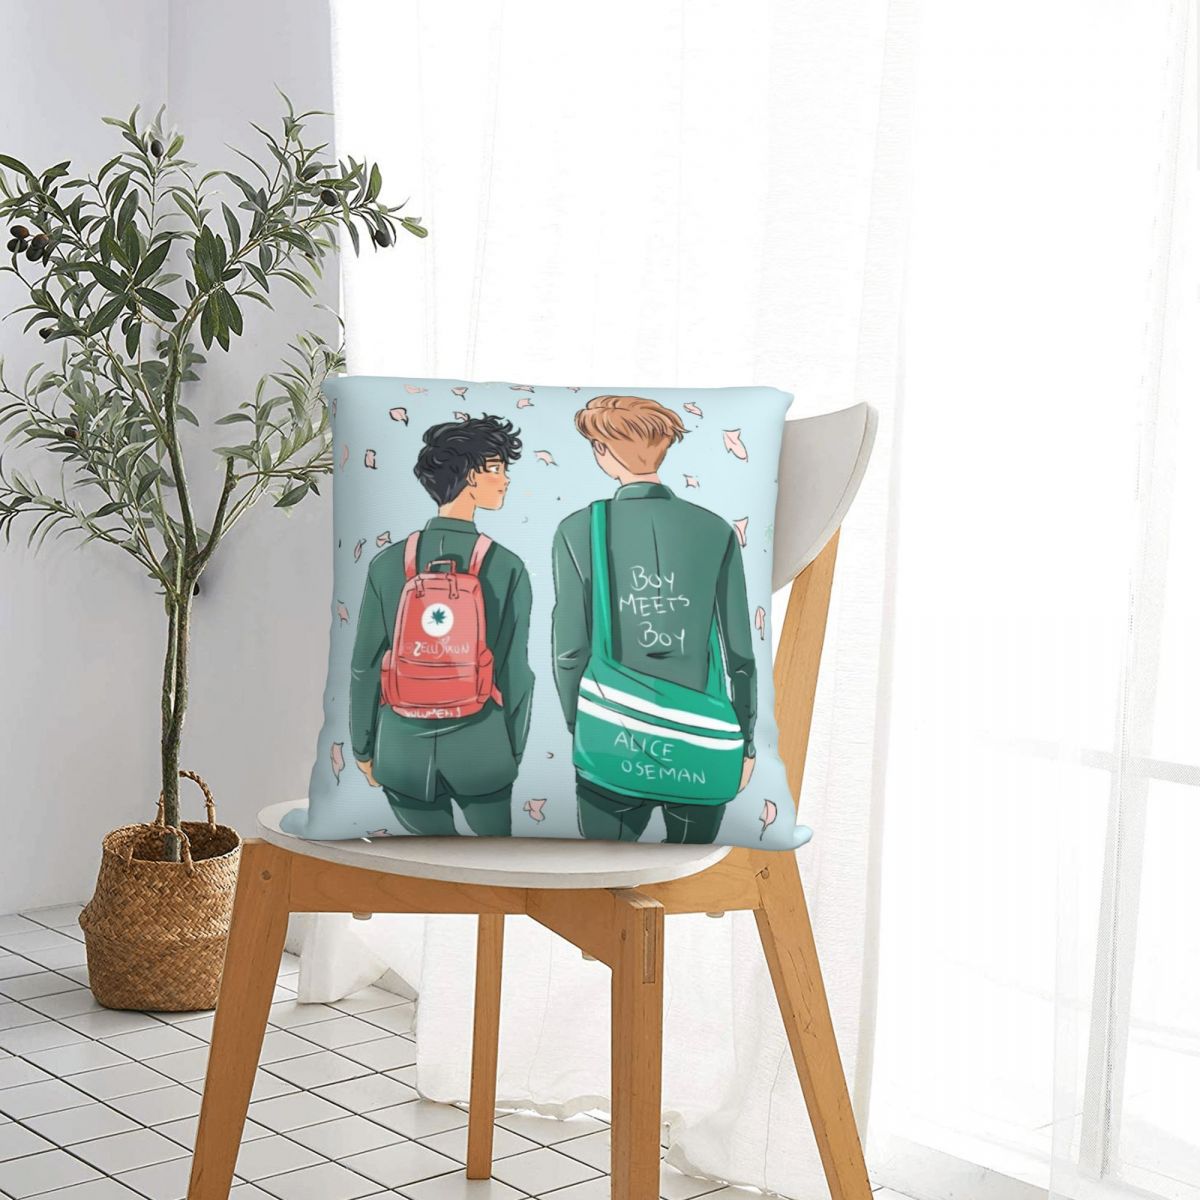 Heartstopper Duo Pillow Case Polyester Decorative Pillow Heartstopper Kit Connor Oseman Charlie Nick Boys Love Casual Pillowcase